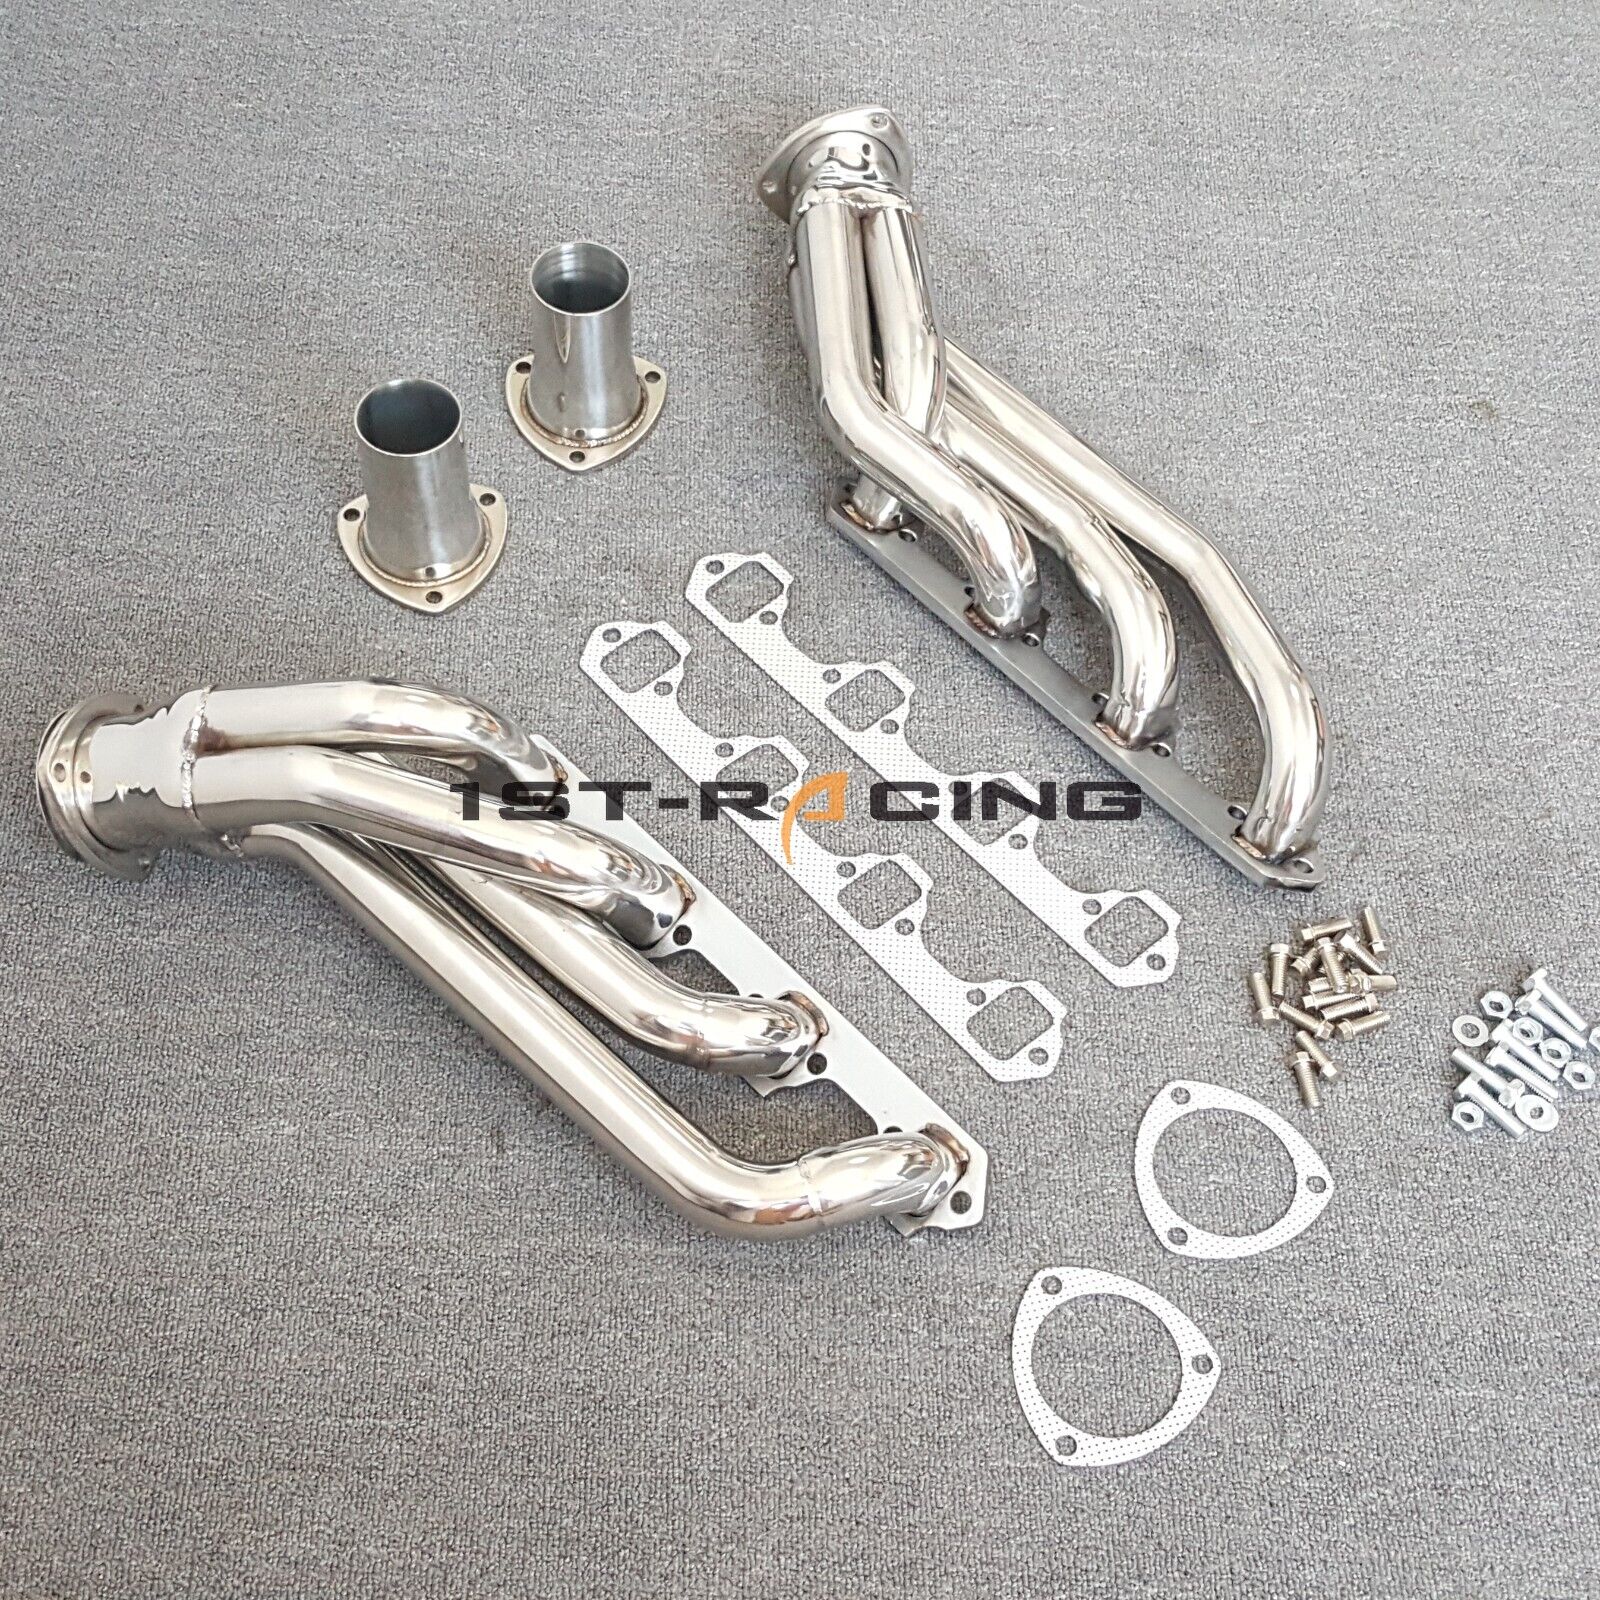 Mid Length Exhaust Header for Small Block Ford 64-73 Mustang Falcon SBF 260 289